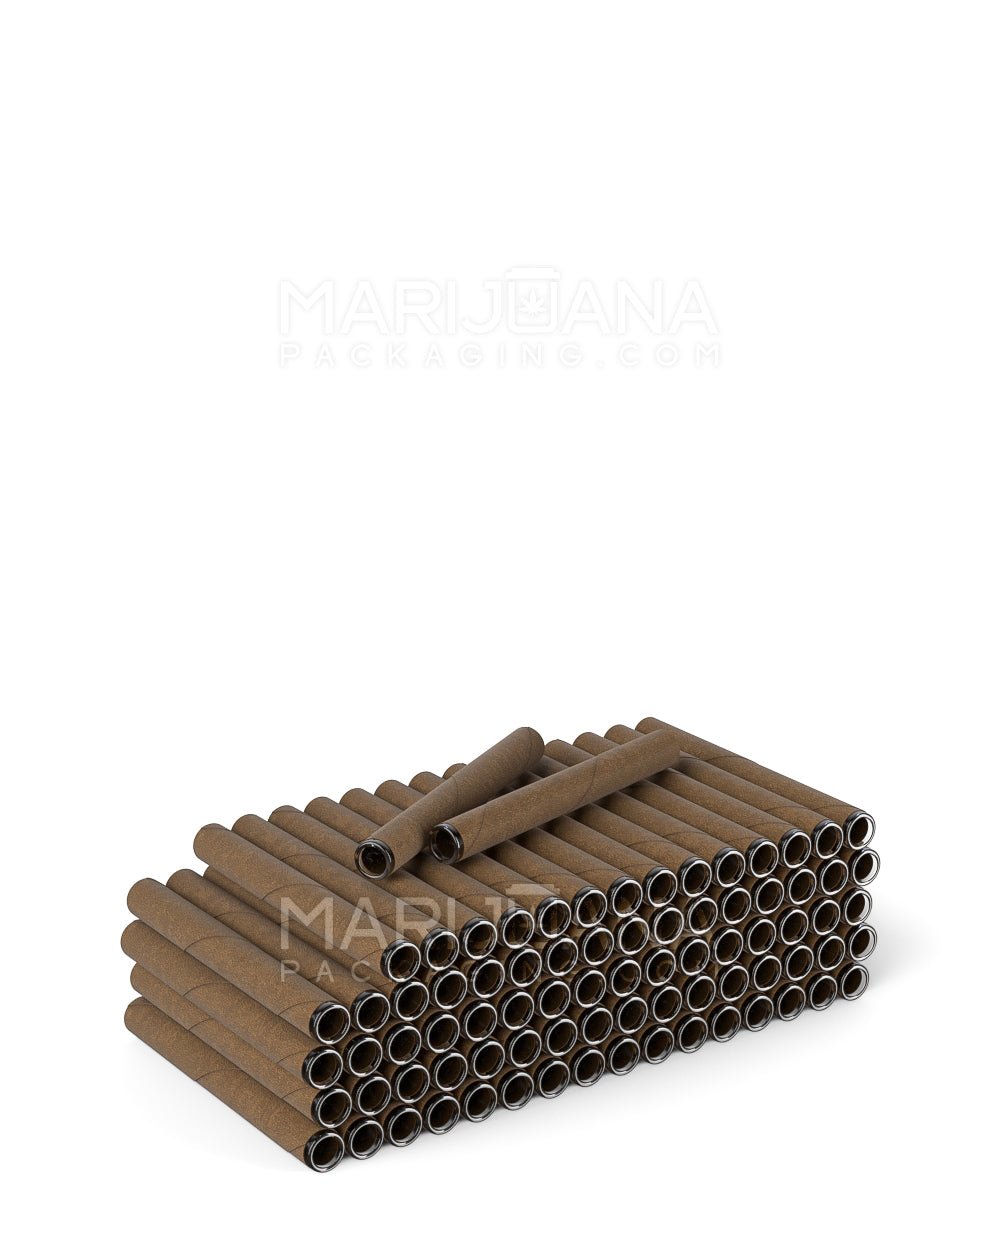 King Size Glass Tipped Wrapped Pre-Rolled Blunt Cones | 109mm - Brown Paper - 80 Count - 11